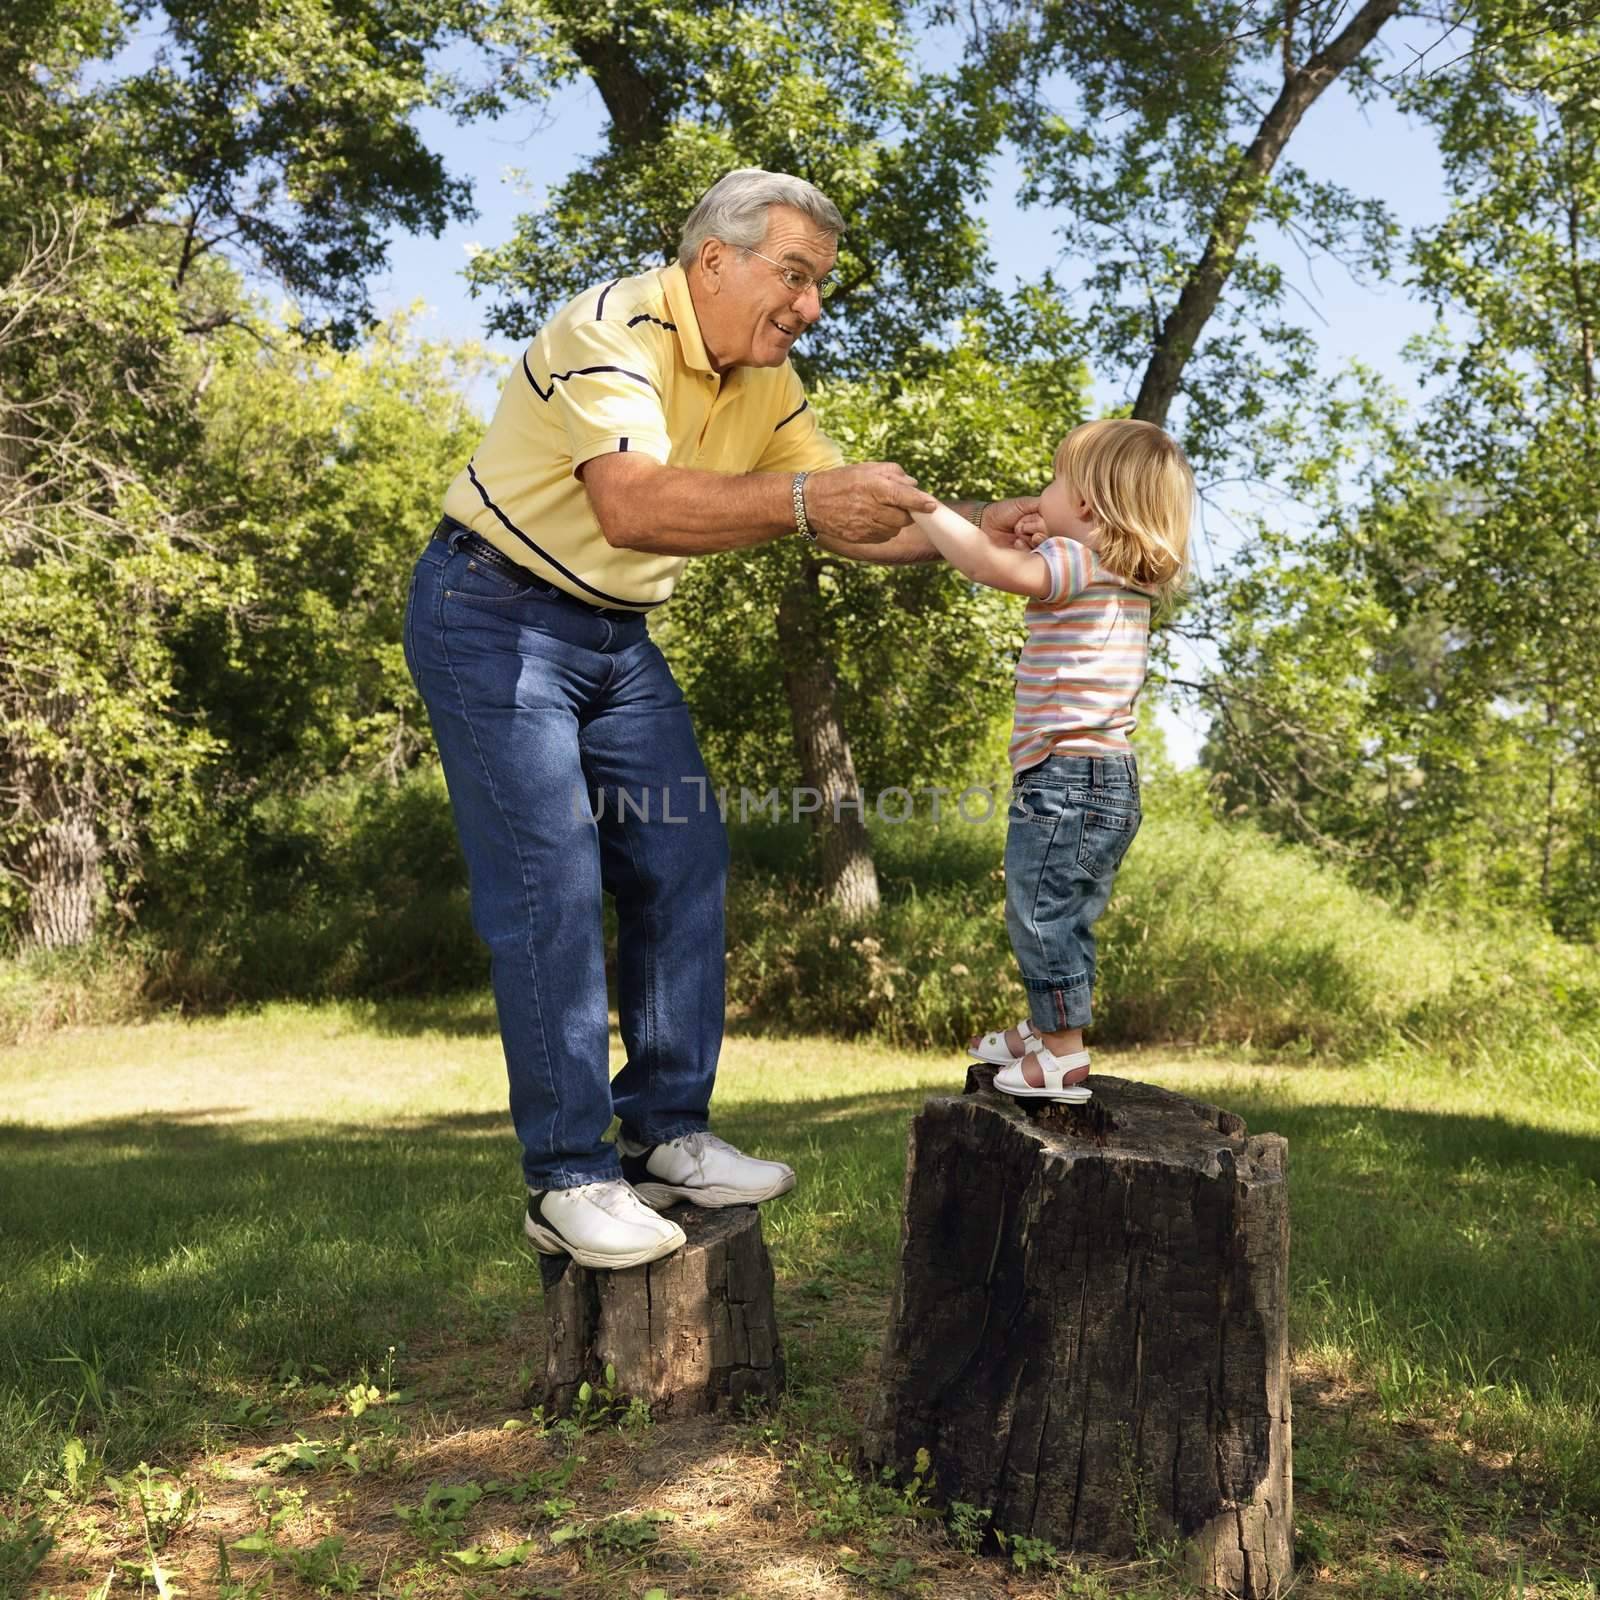 Grandfather and granddaughter playing outside holding hands balancing on stumps.